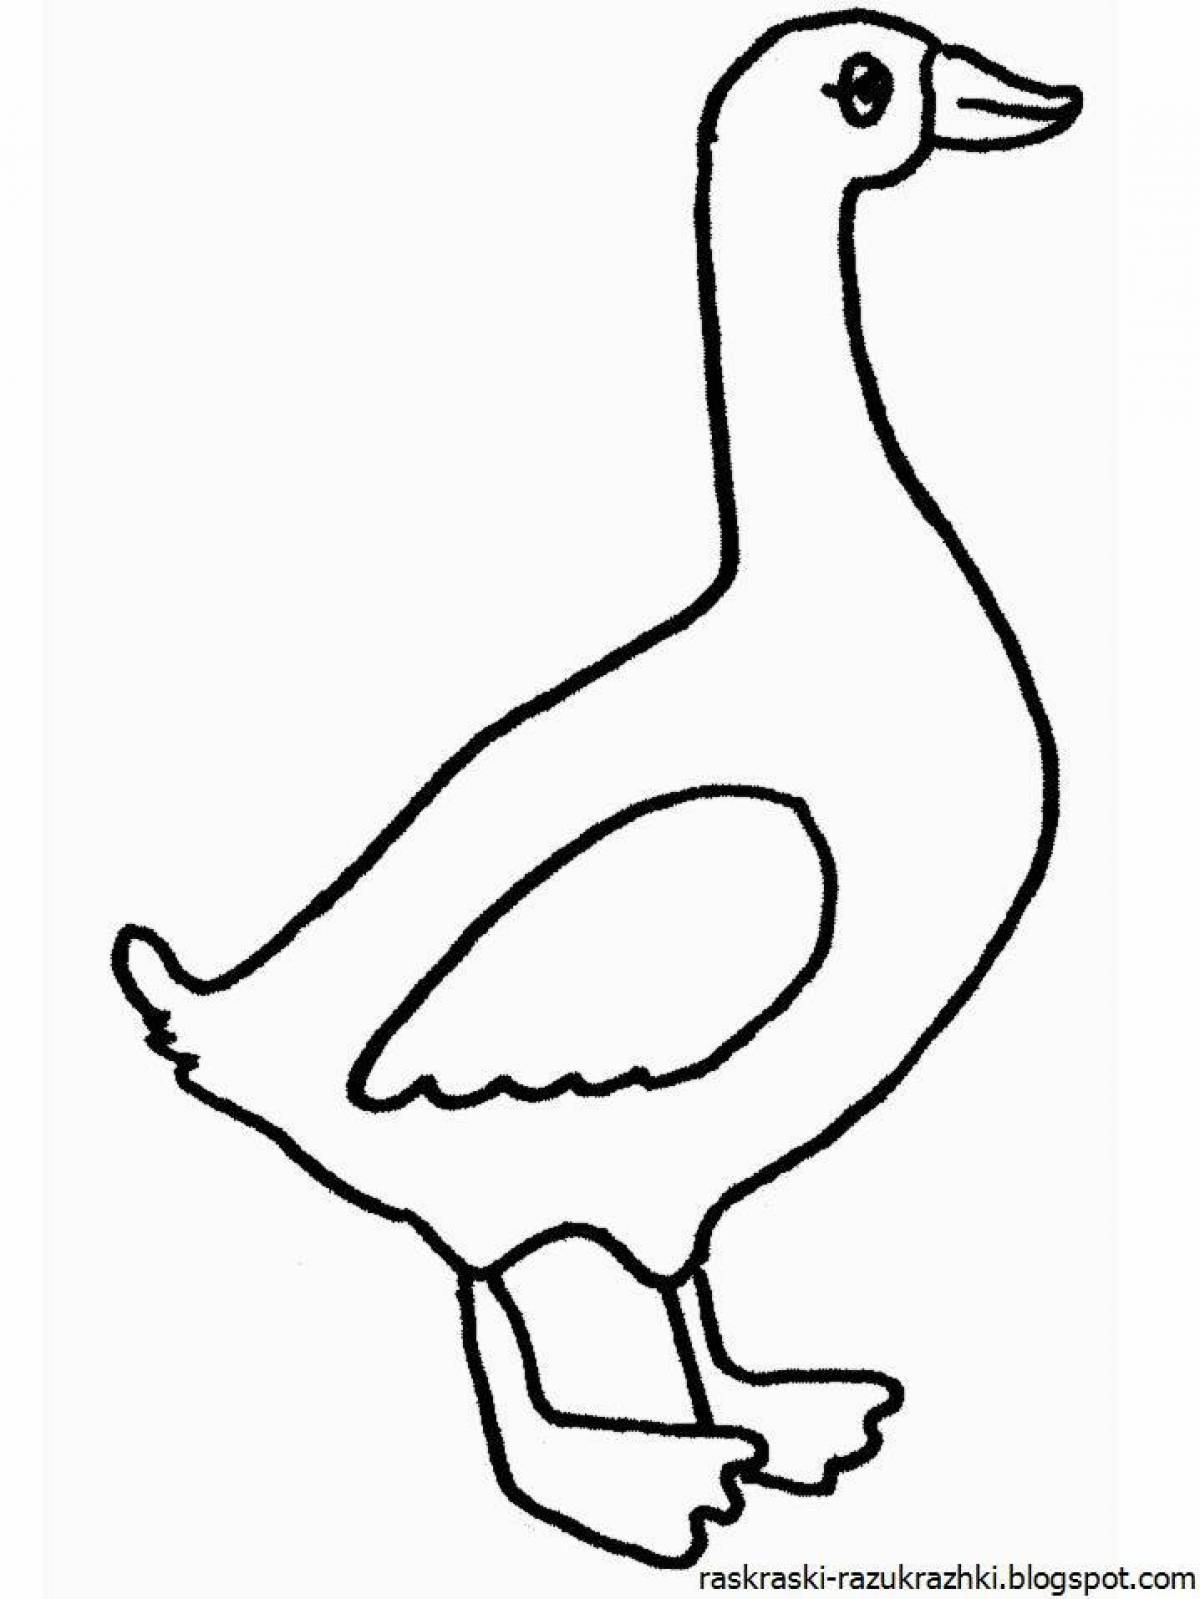 Glorious goose coloring pages for kids